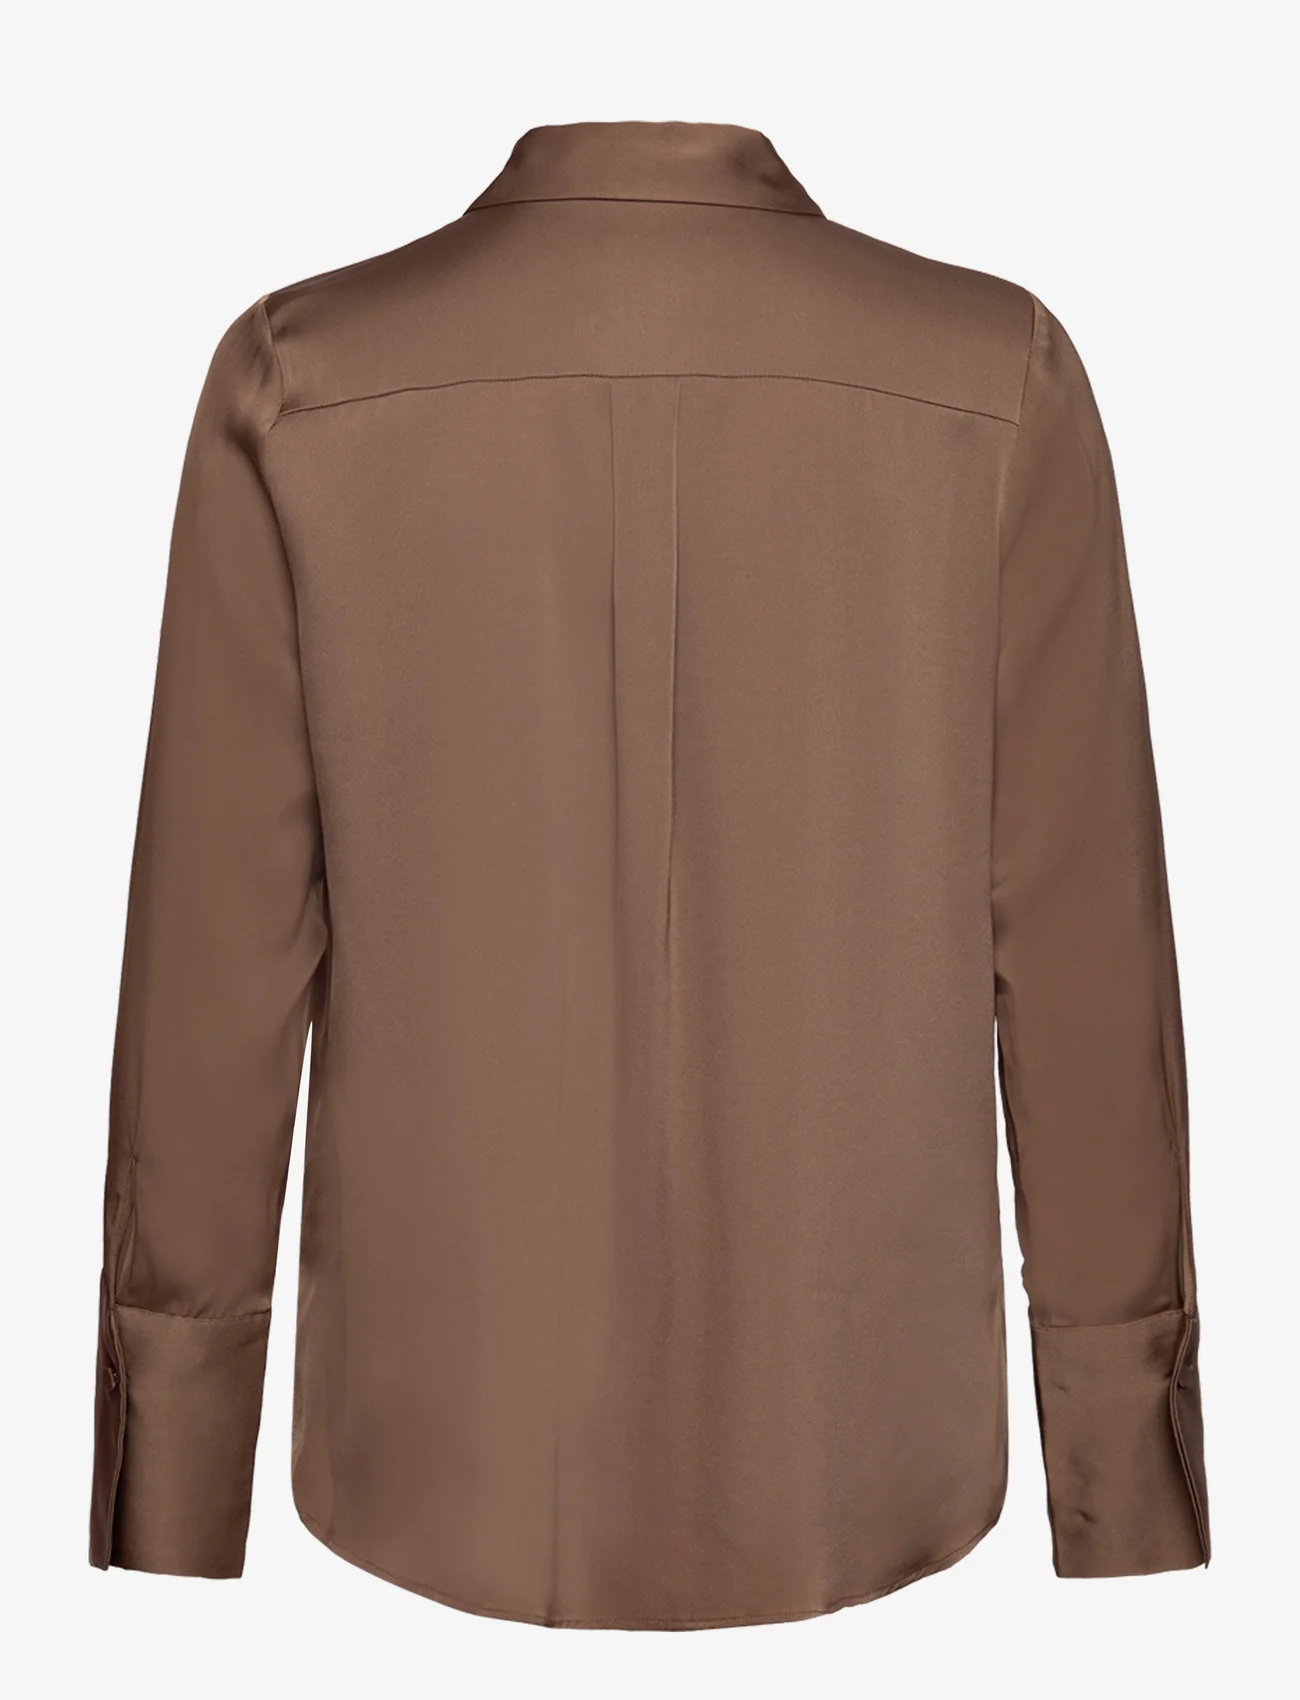 Marville Road - Leonie Silk Shirt - long-sleeved shirts - greige - 1